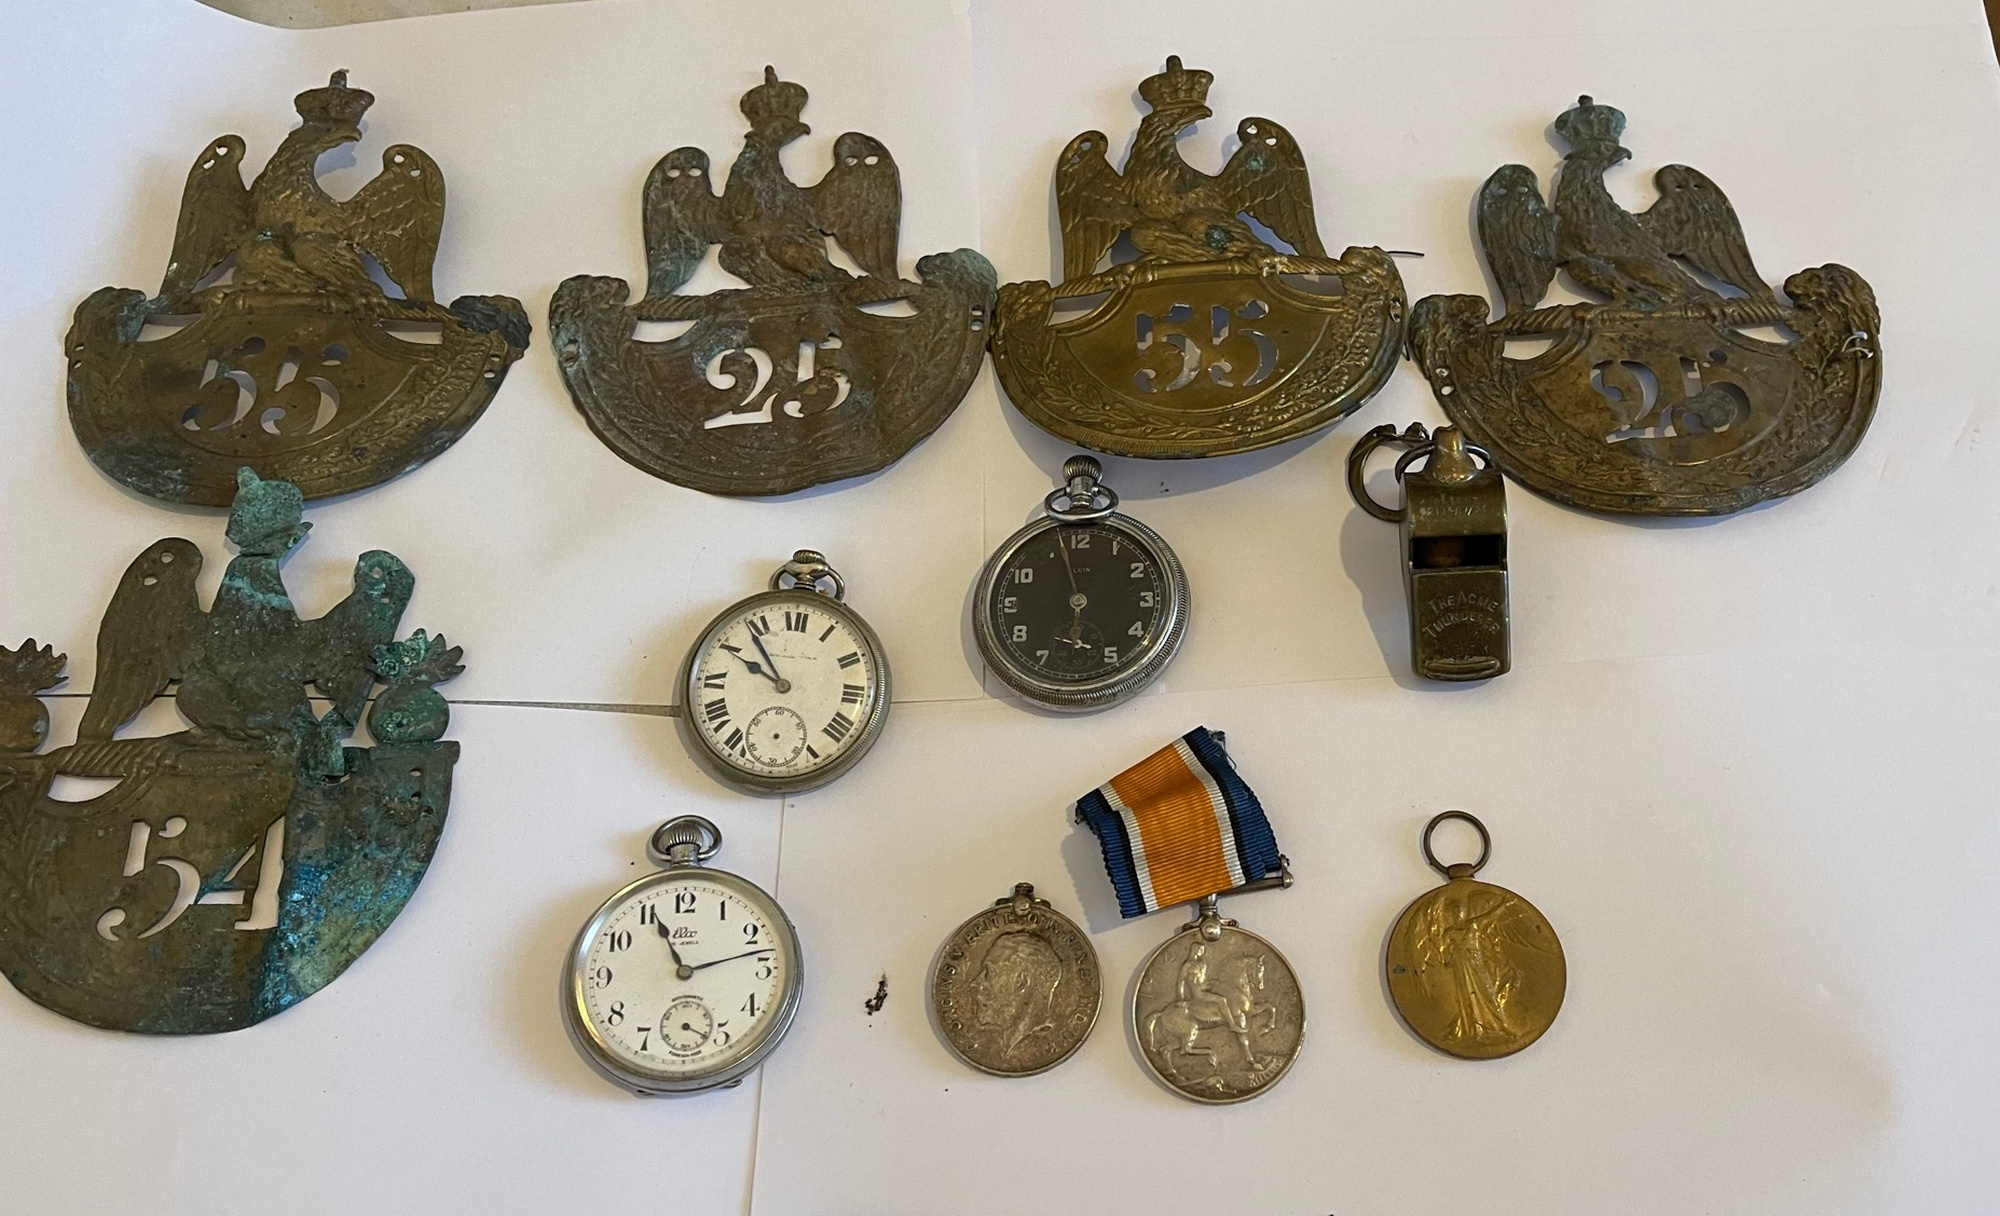 Lot of Napoleonic Brass Cap Badges, Military Watches, Medals etc.